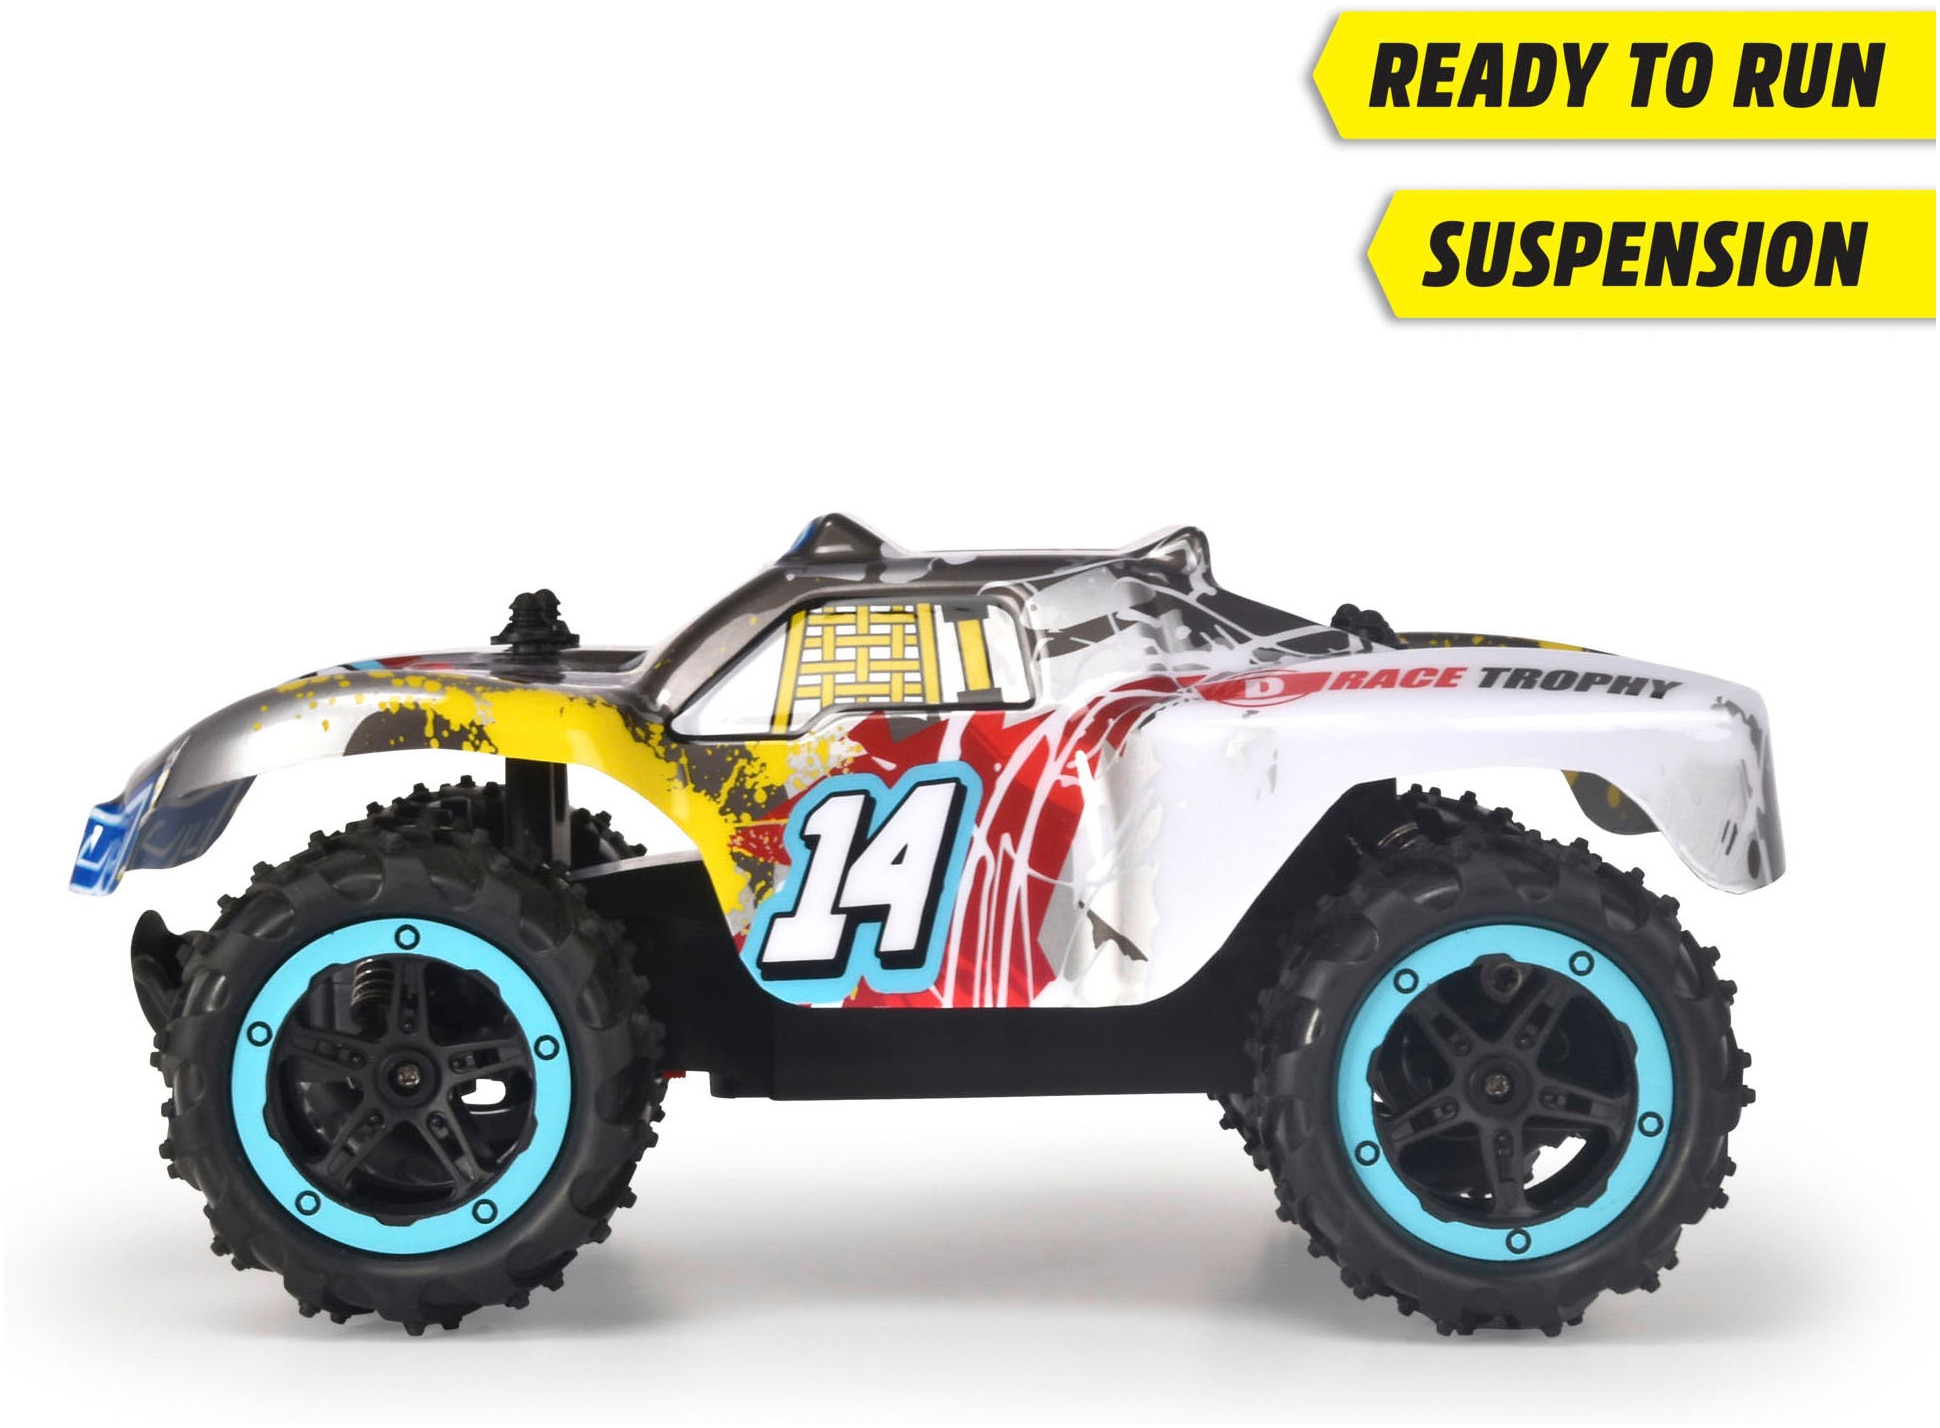 Dickie Toys RC-Truck »Race Trophy, 2,4 GHz«